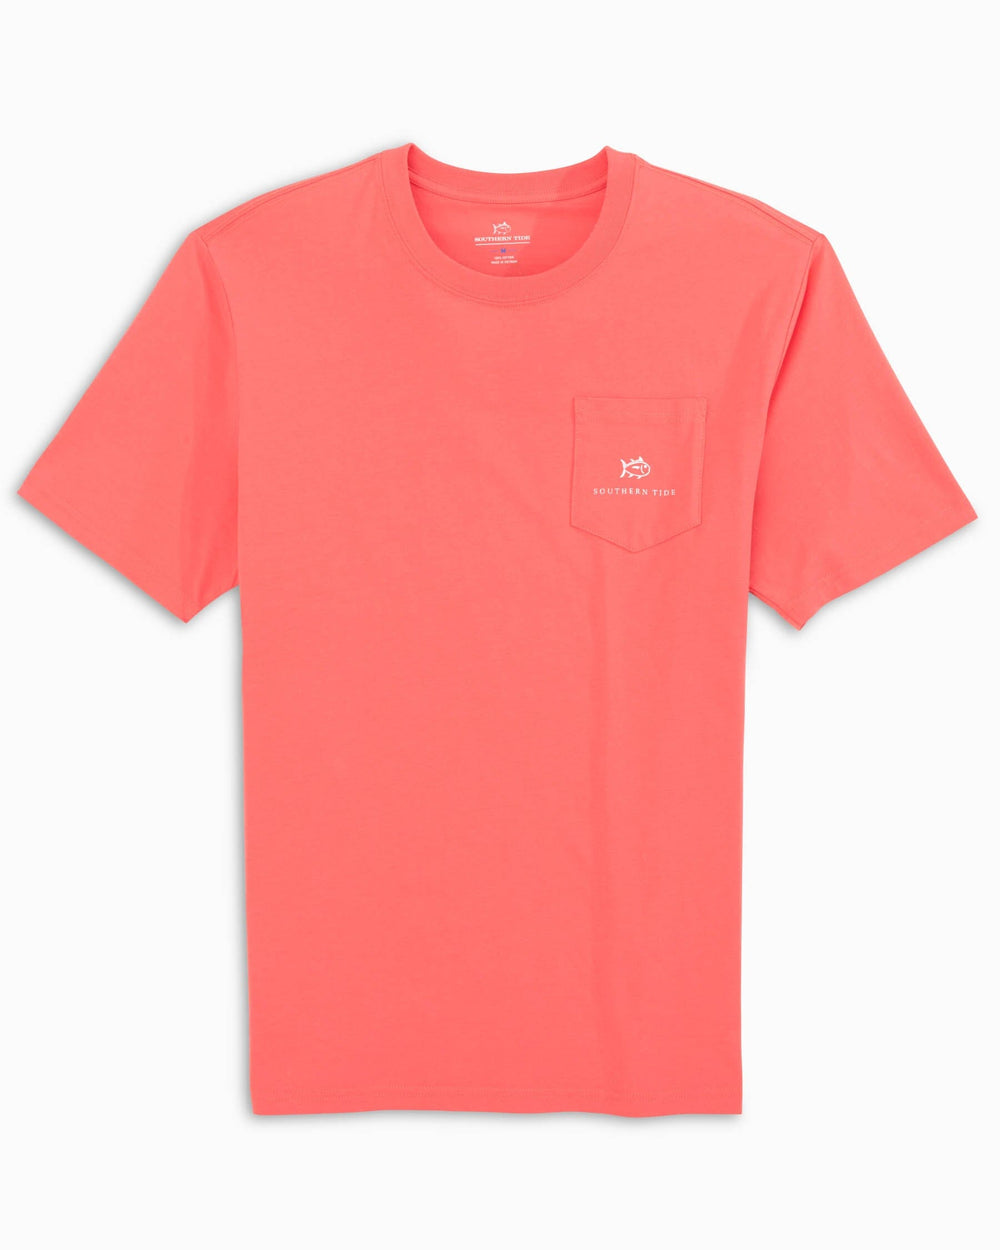 The front view of the Southern Tide Made in the Shade T-shirt by Southern Tide - Rosewood Red